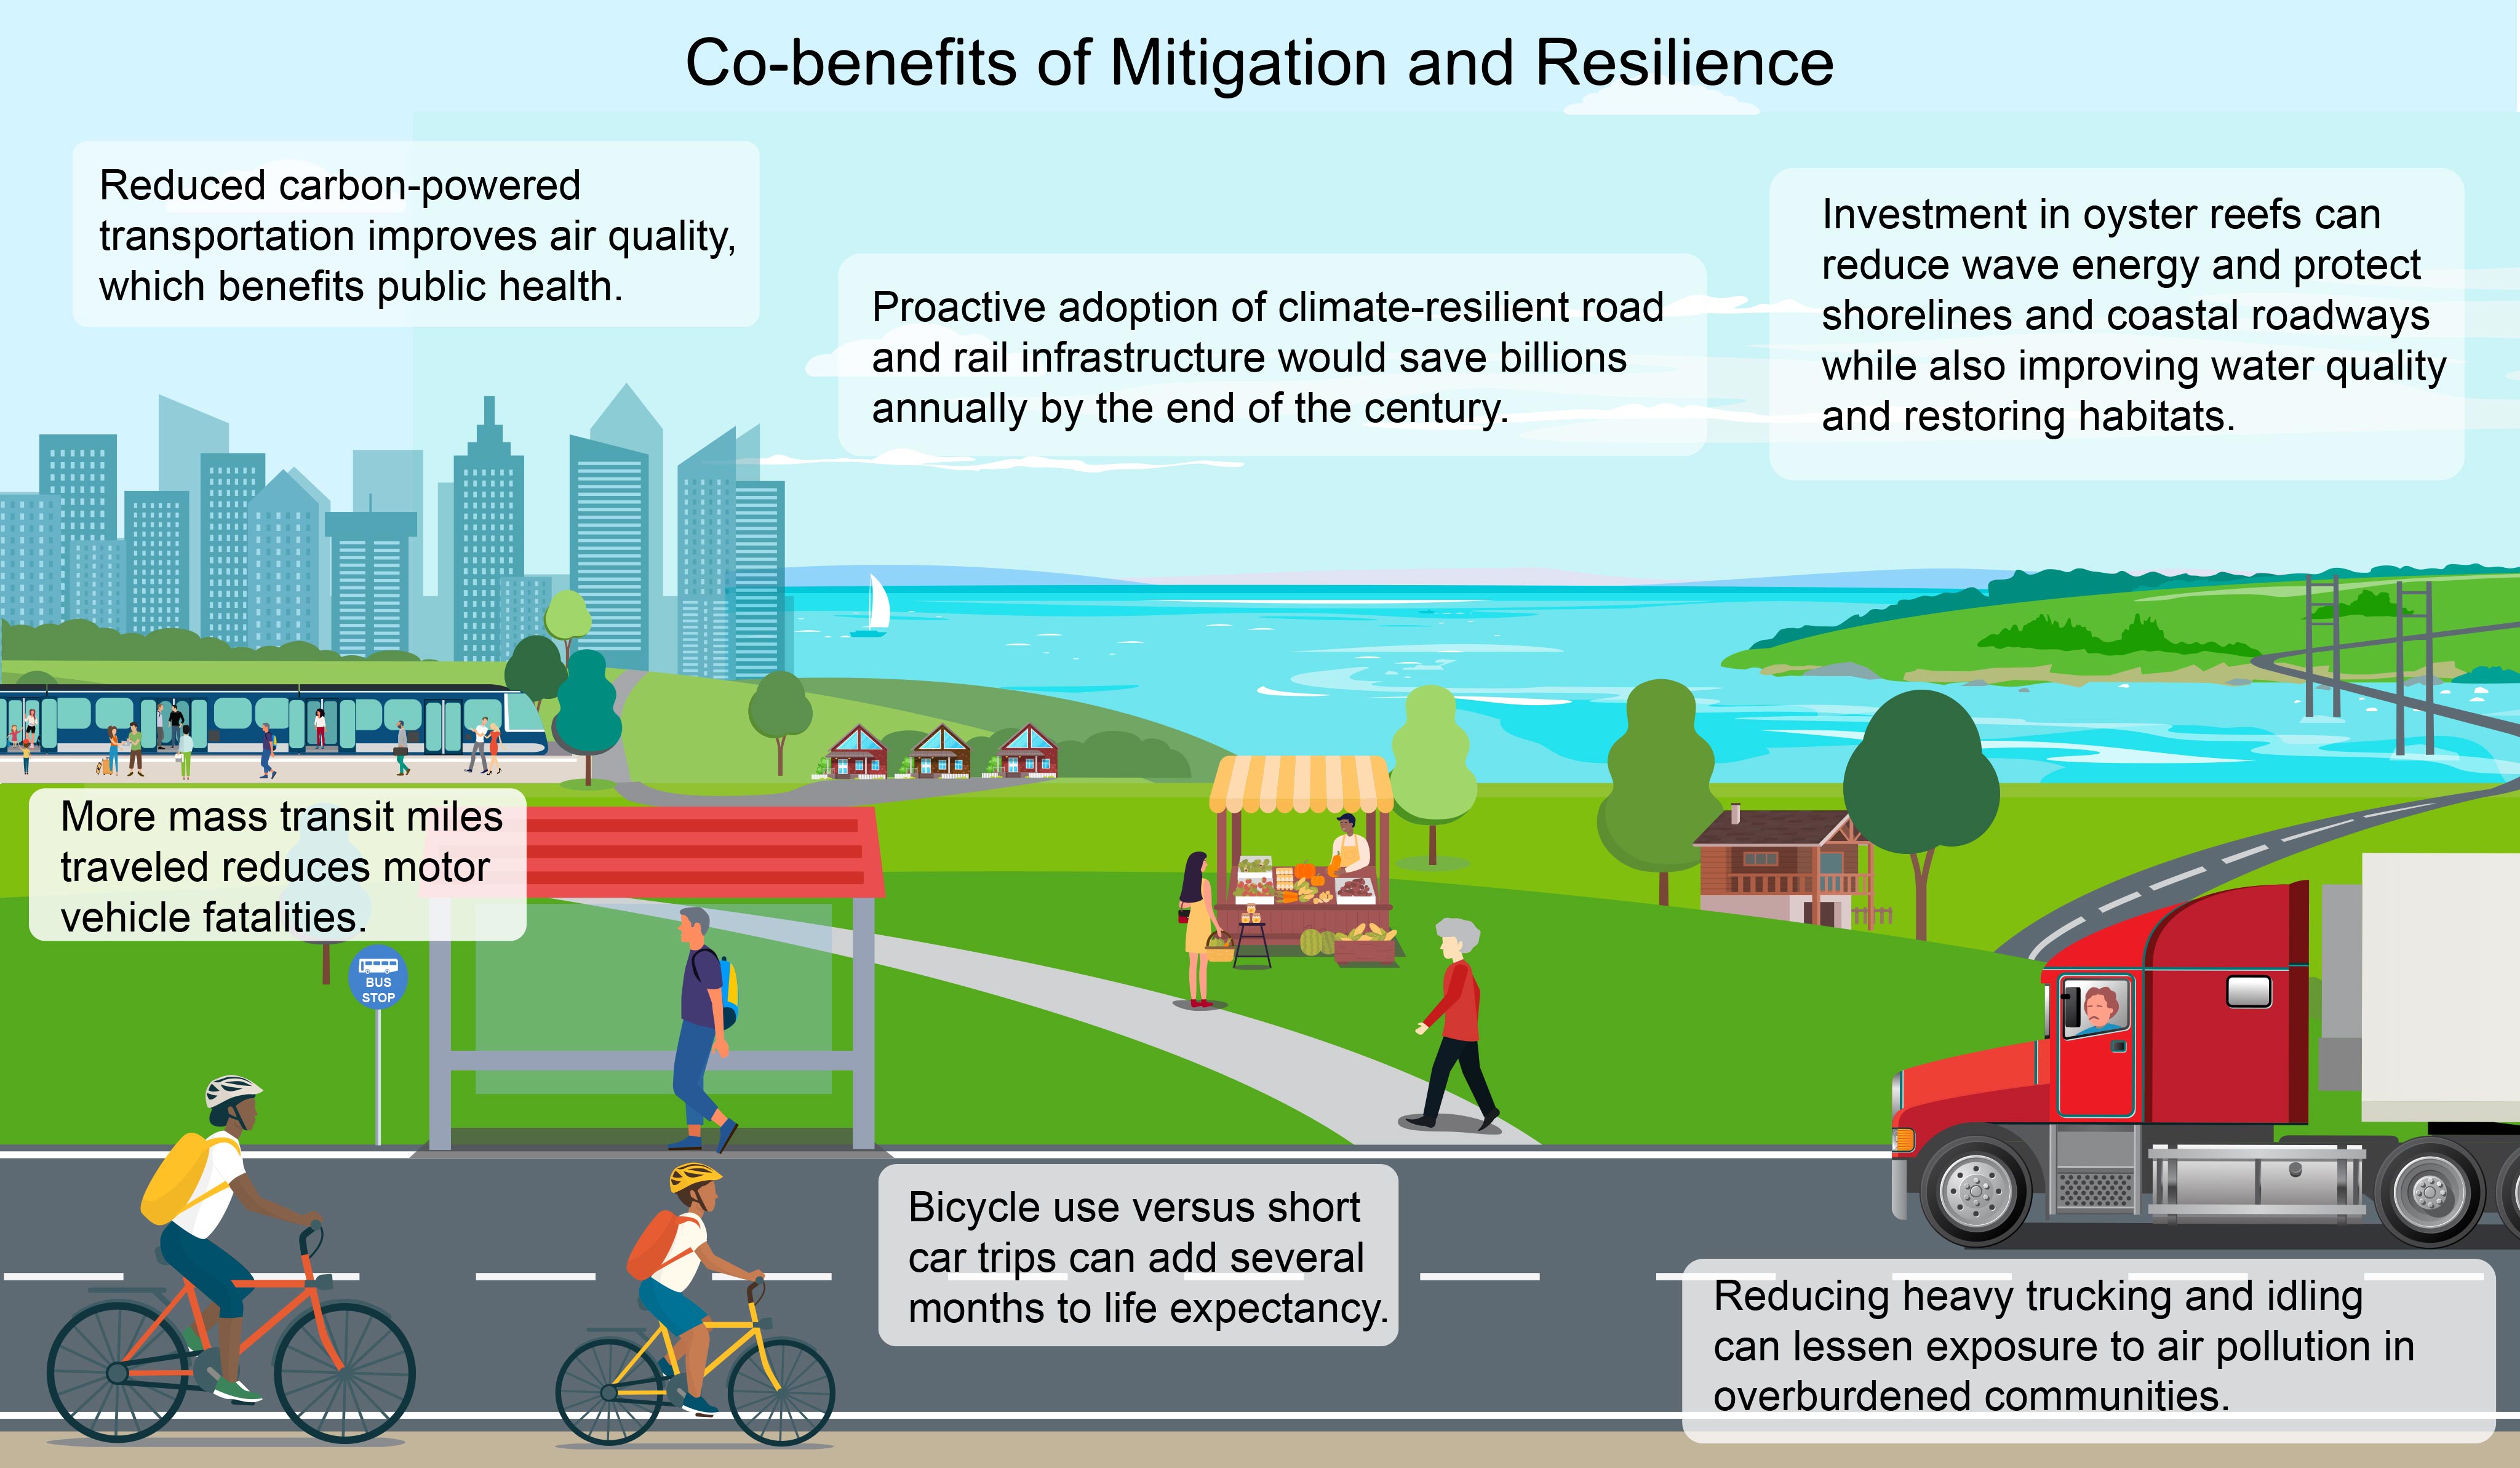 Co-benefits of Mitigation and Resilience